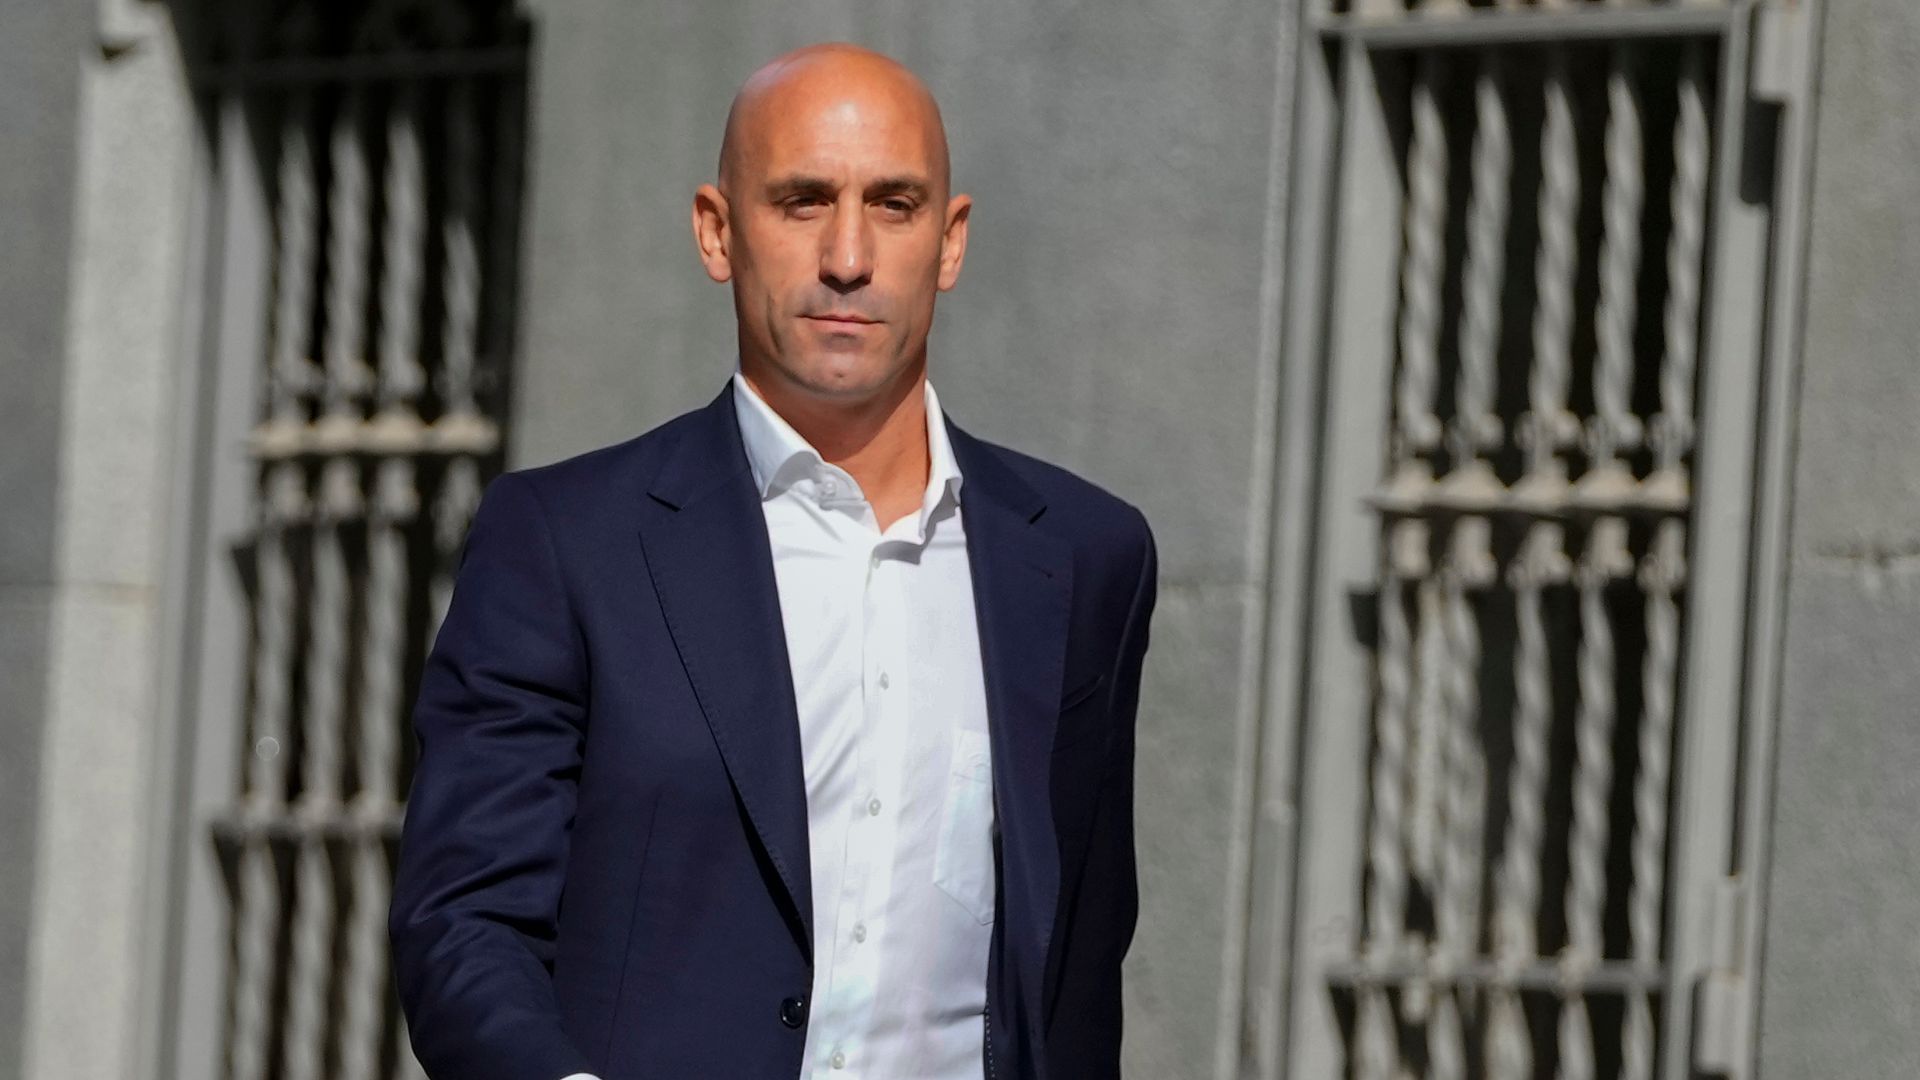 Rubiales should be tried for non-consensual Hermoso kiss - judge